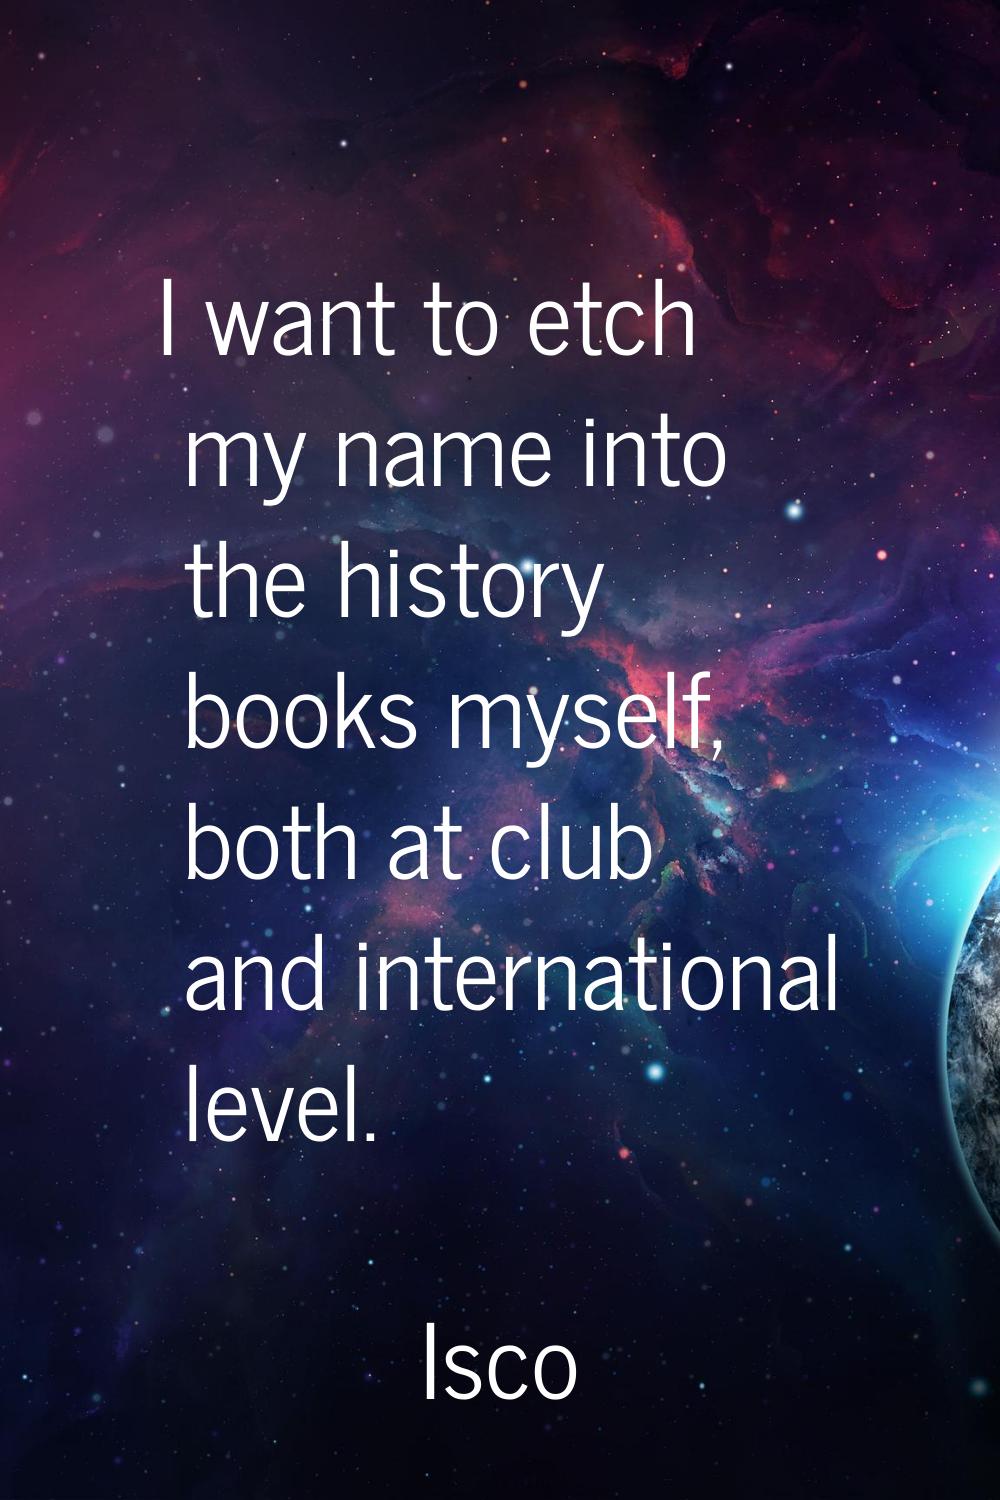 I want to etch my name into the history books myself, both at club and international level.